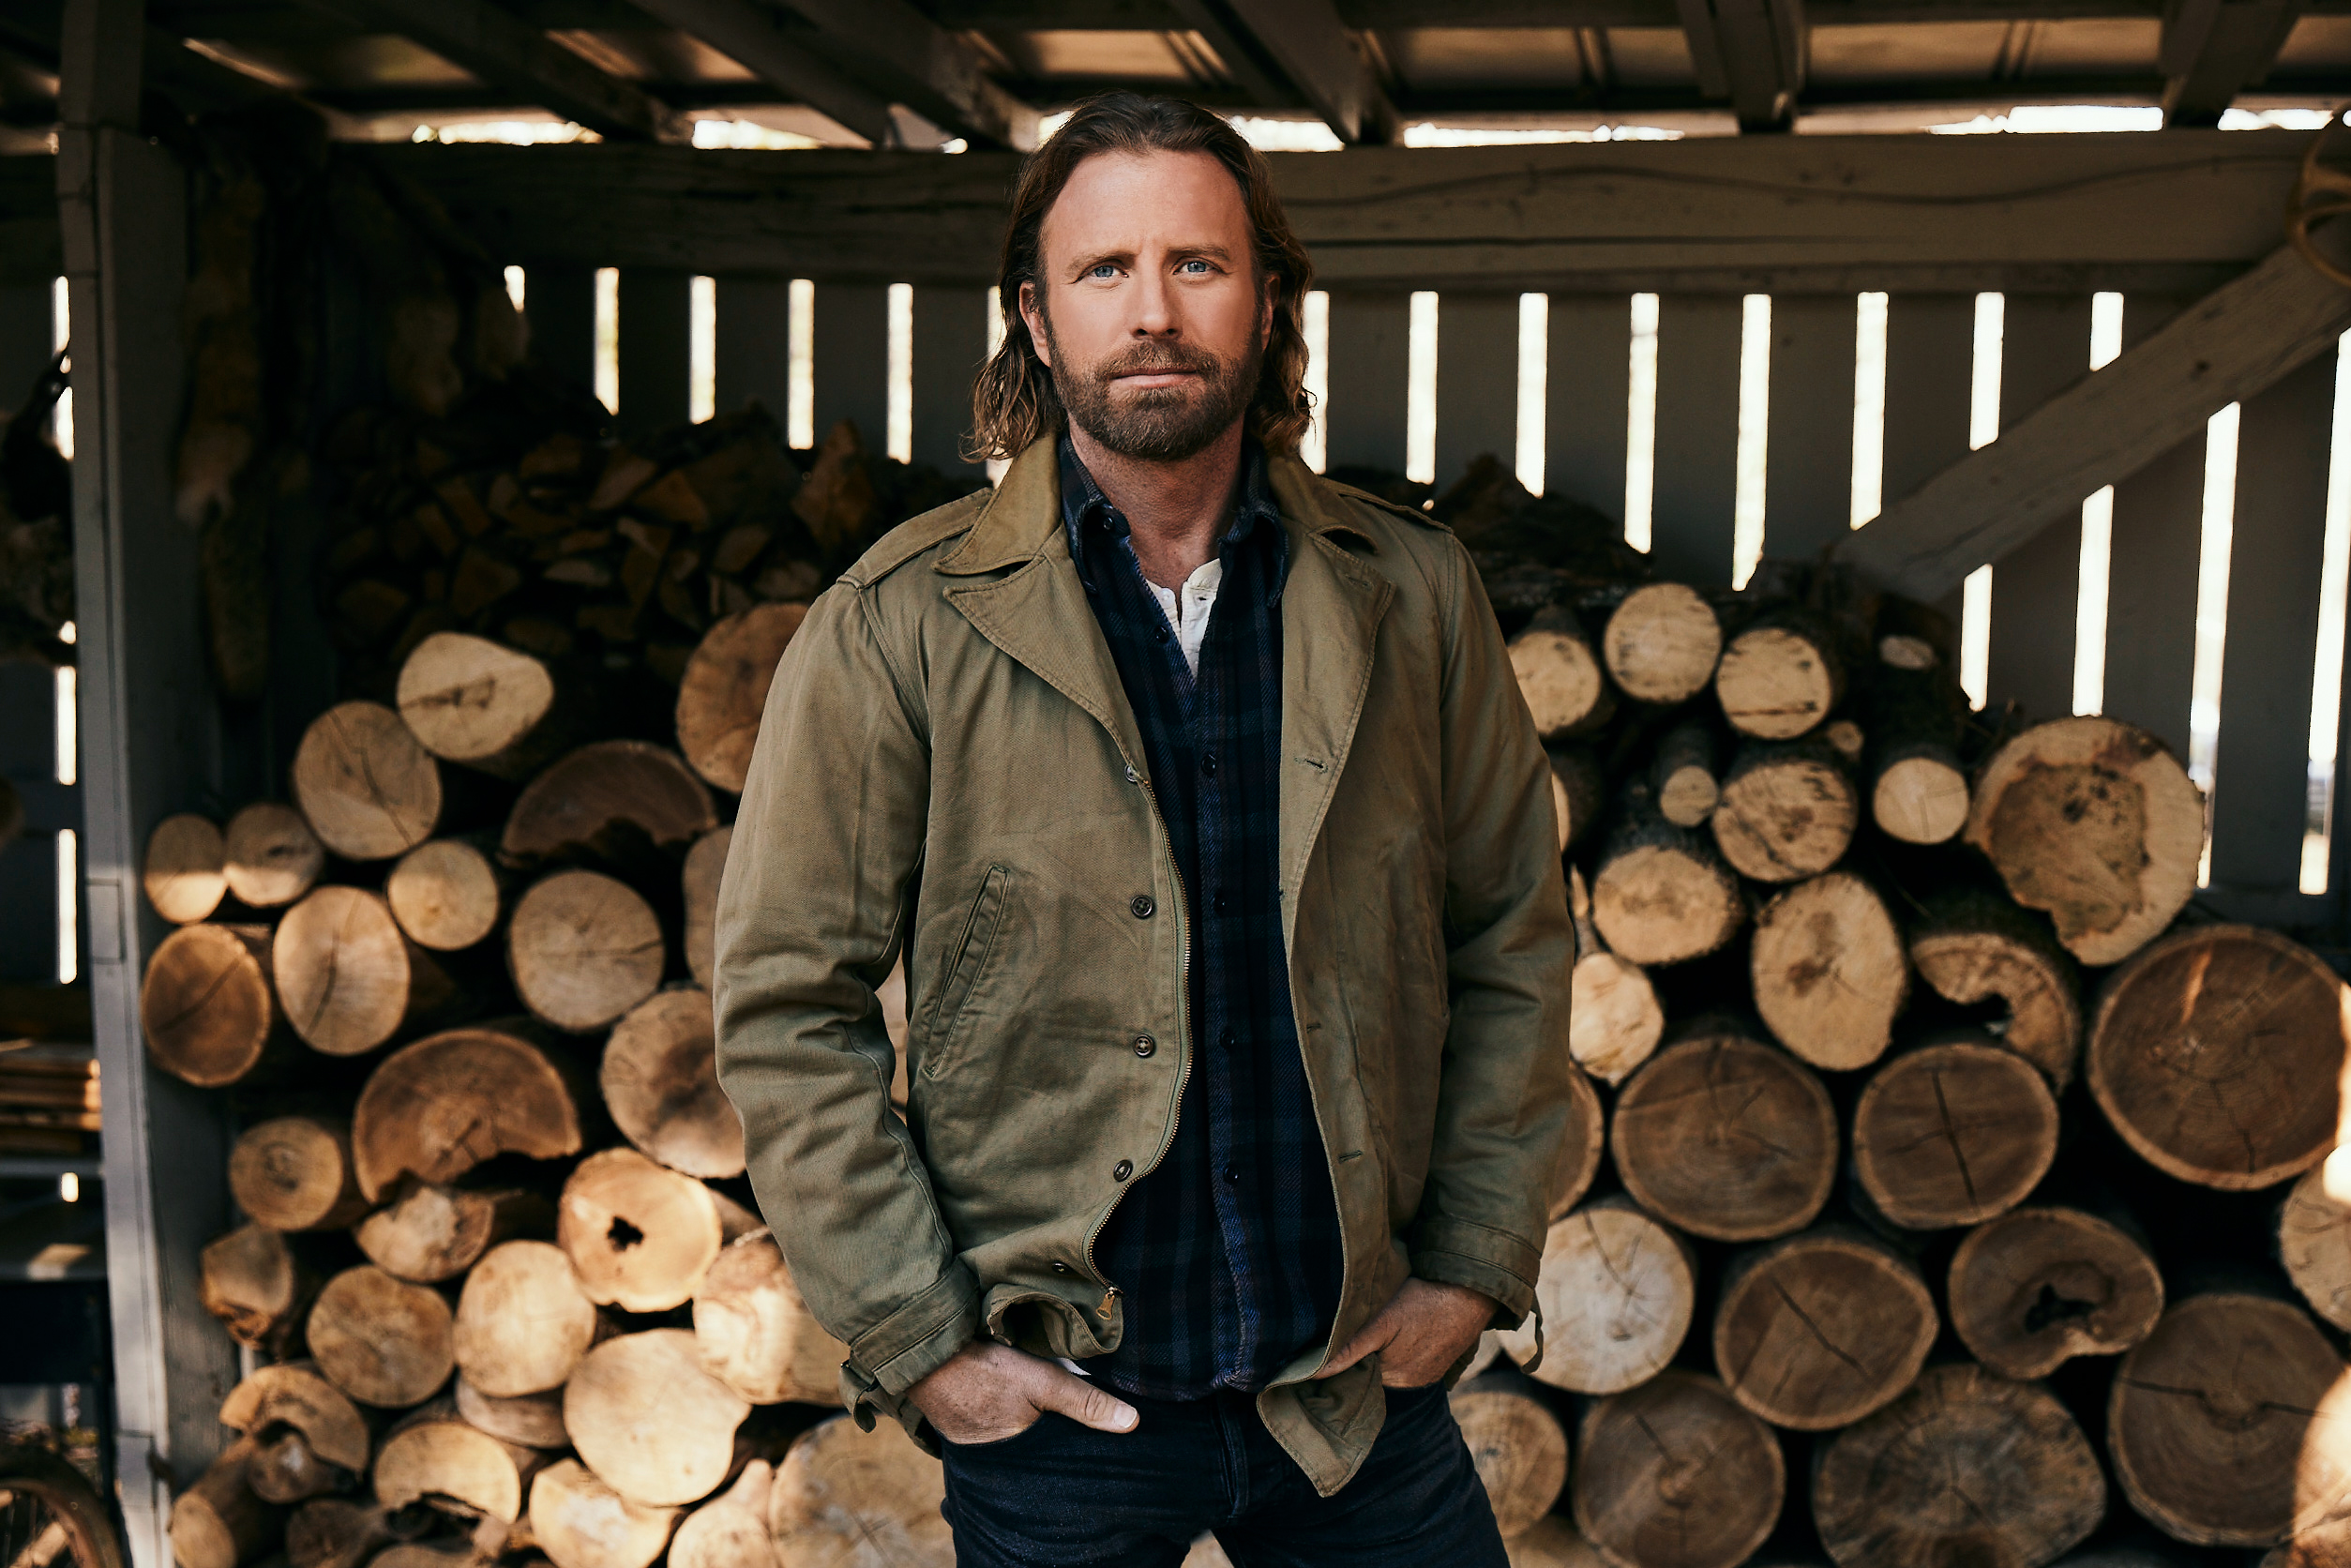 DIERKS BENTLEY GETS READY TO HEAD OUT ON THE GRAVEL AND GOLD TOUR.